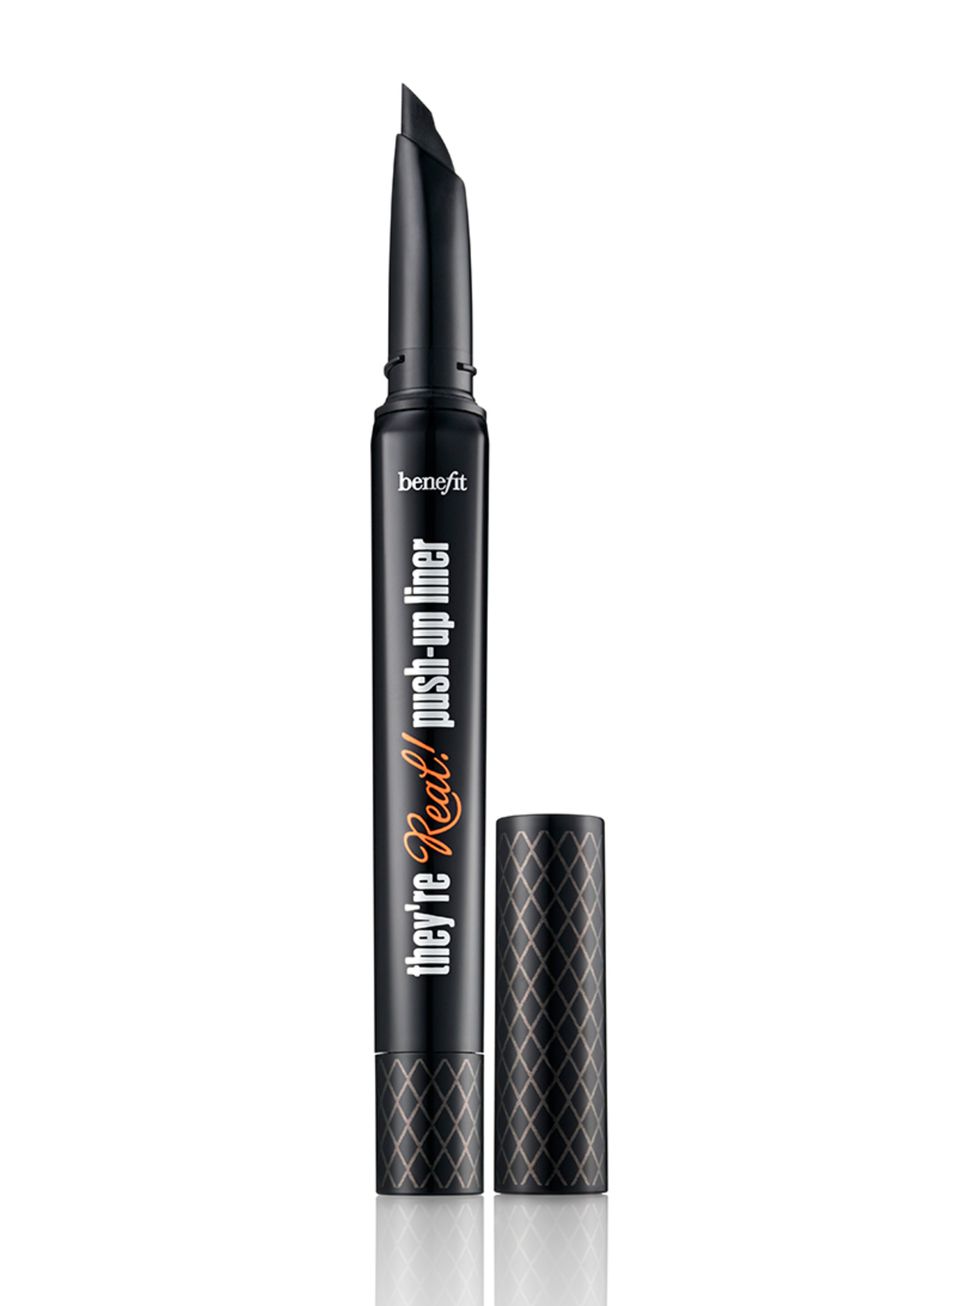 <p><em>Sophie Beresiner, Beauty Director</em></p><p><a href="http://www.benefitcosmetics.co.uk/product/view/theyre-real-push-up-liner">Benefit They're Real! Push-up Liner, £18.50.</a></p><p>It's so black and fluid and creates a really neat, versatile line